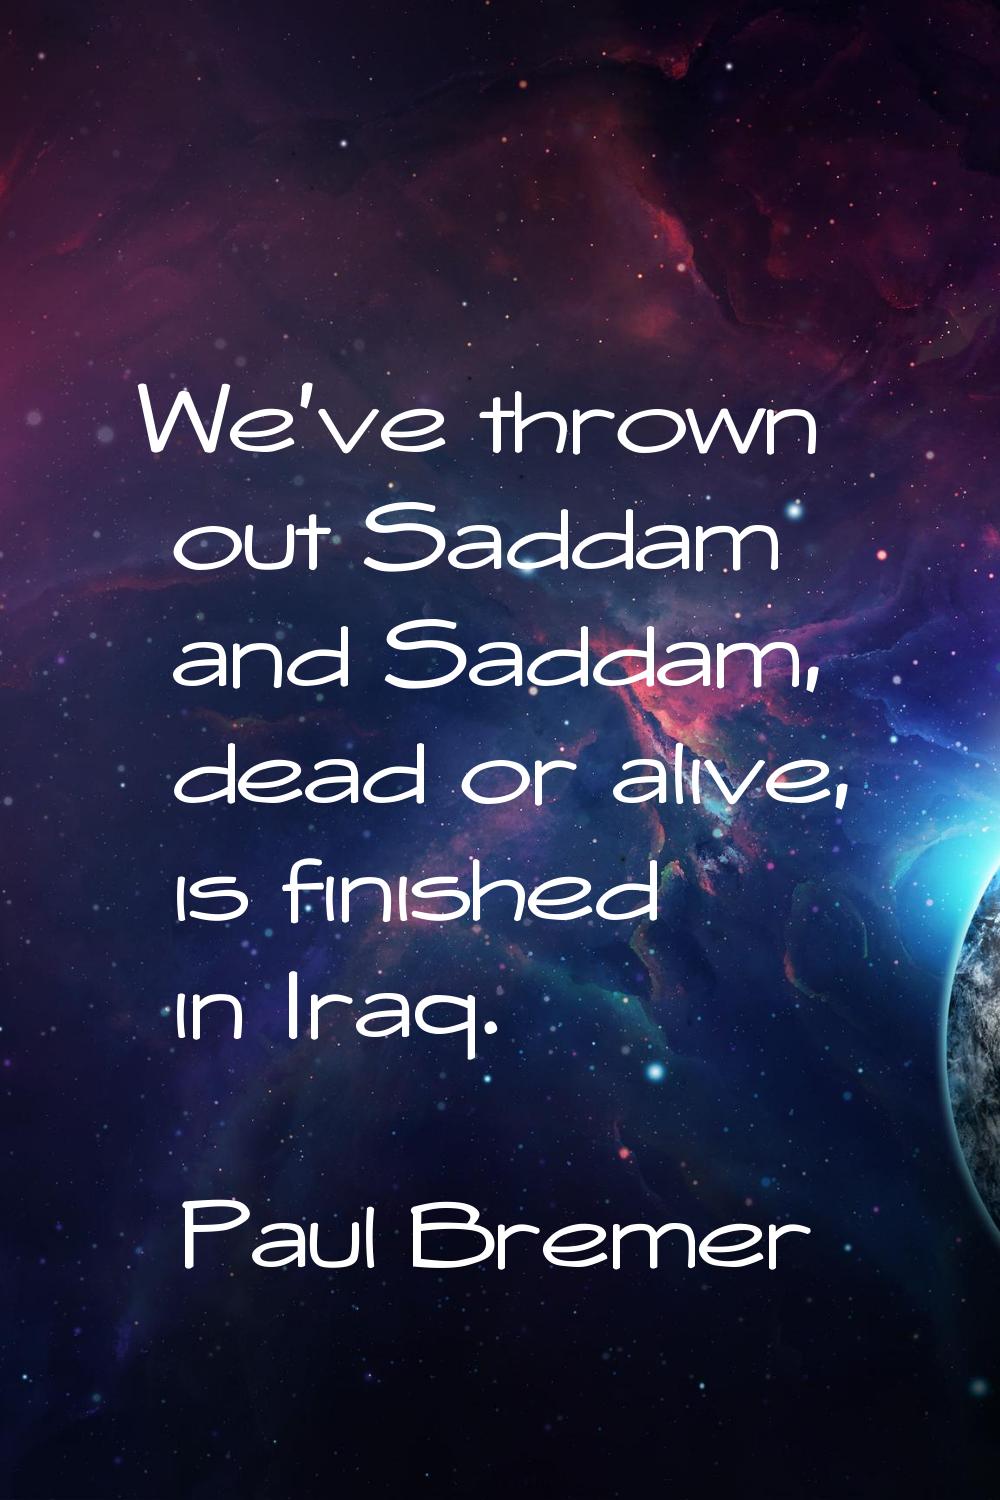 We've thrown out Saddam and Saddam, dead or alive, is finished in Iraq.